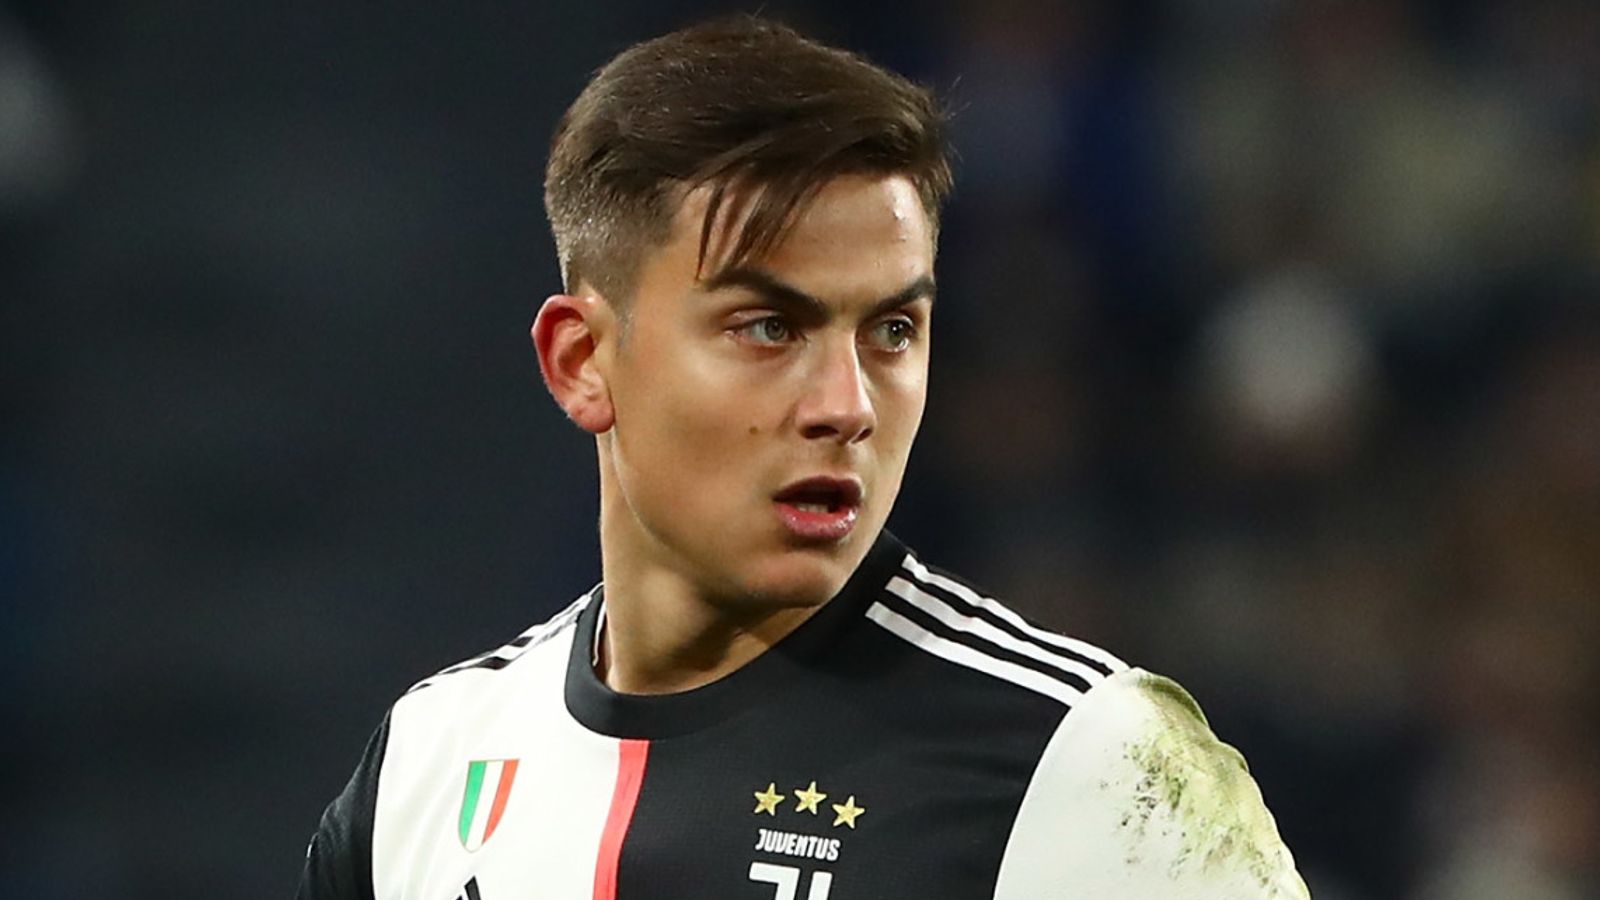 Juventus Paulo Dybala Named Serie A MVP For 2019/20